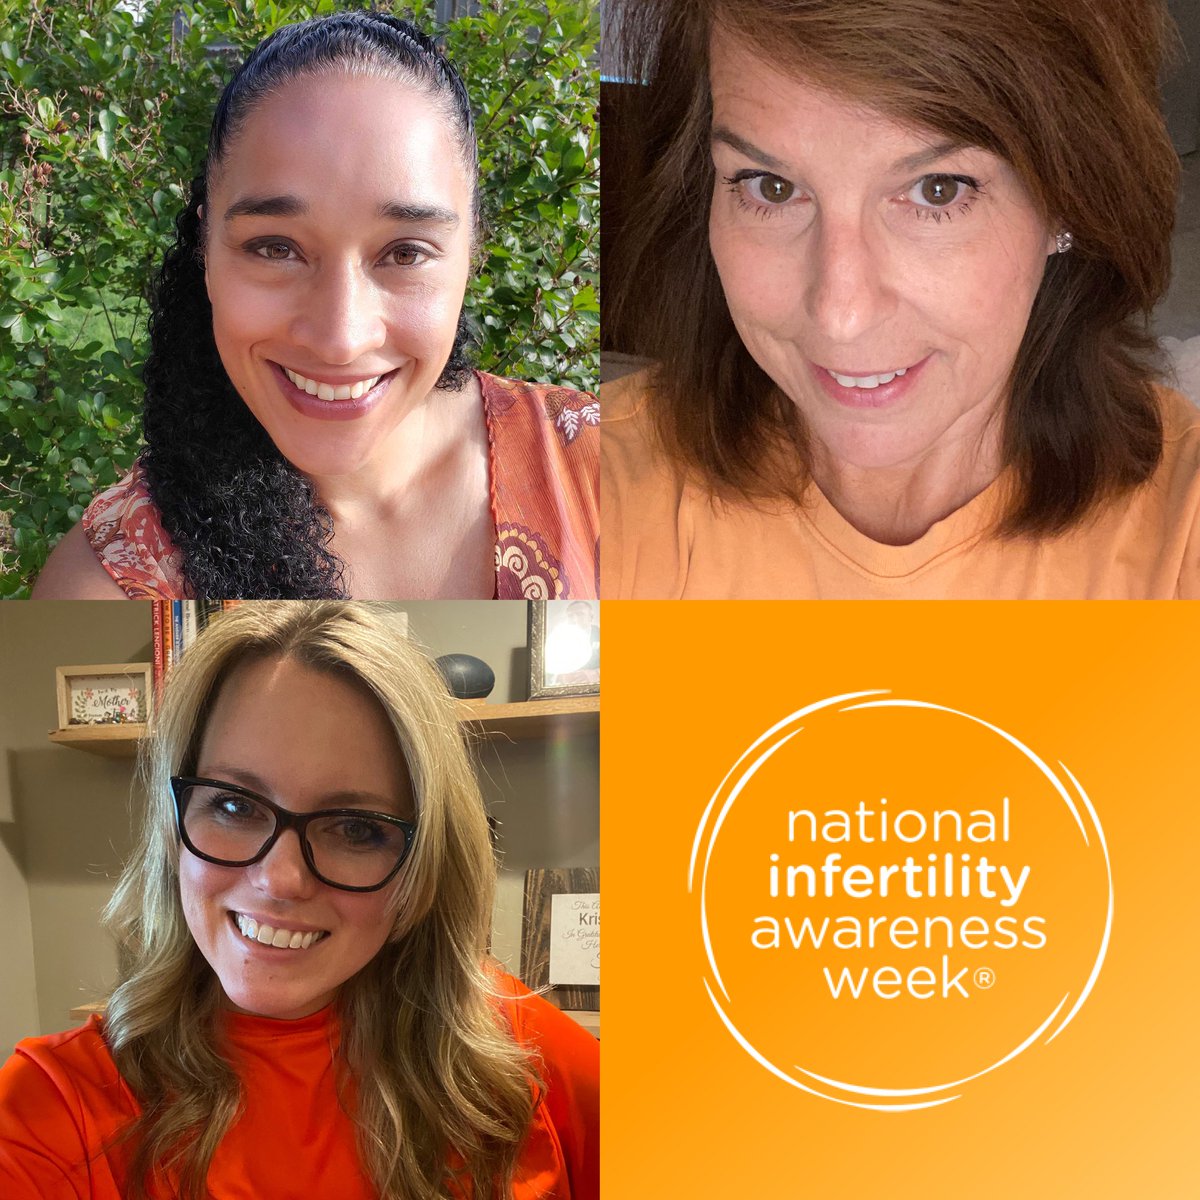 #TeamTMRW is proud to rock orange to support National Infertility Awareness Week® (#NIAW2022), hosted by @RESOLVEOrg. Learn more at infertilityawareness.org.